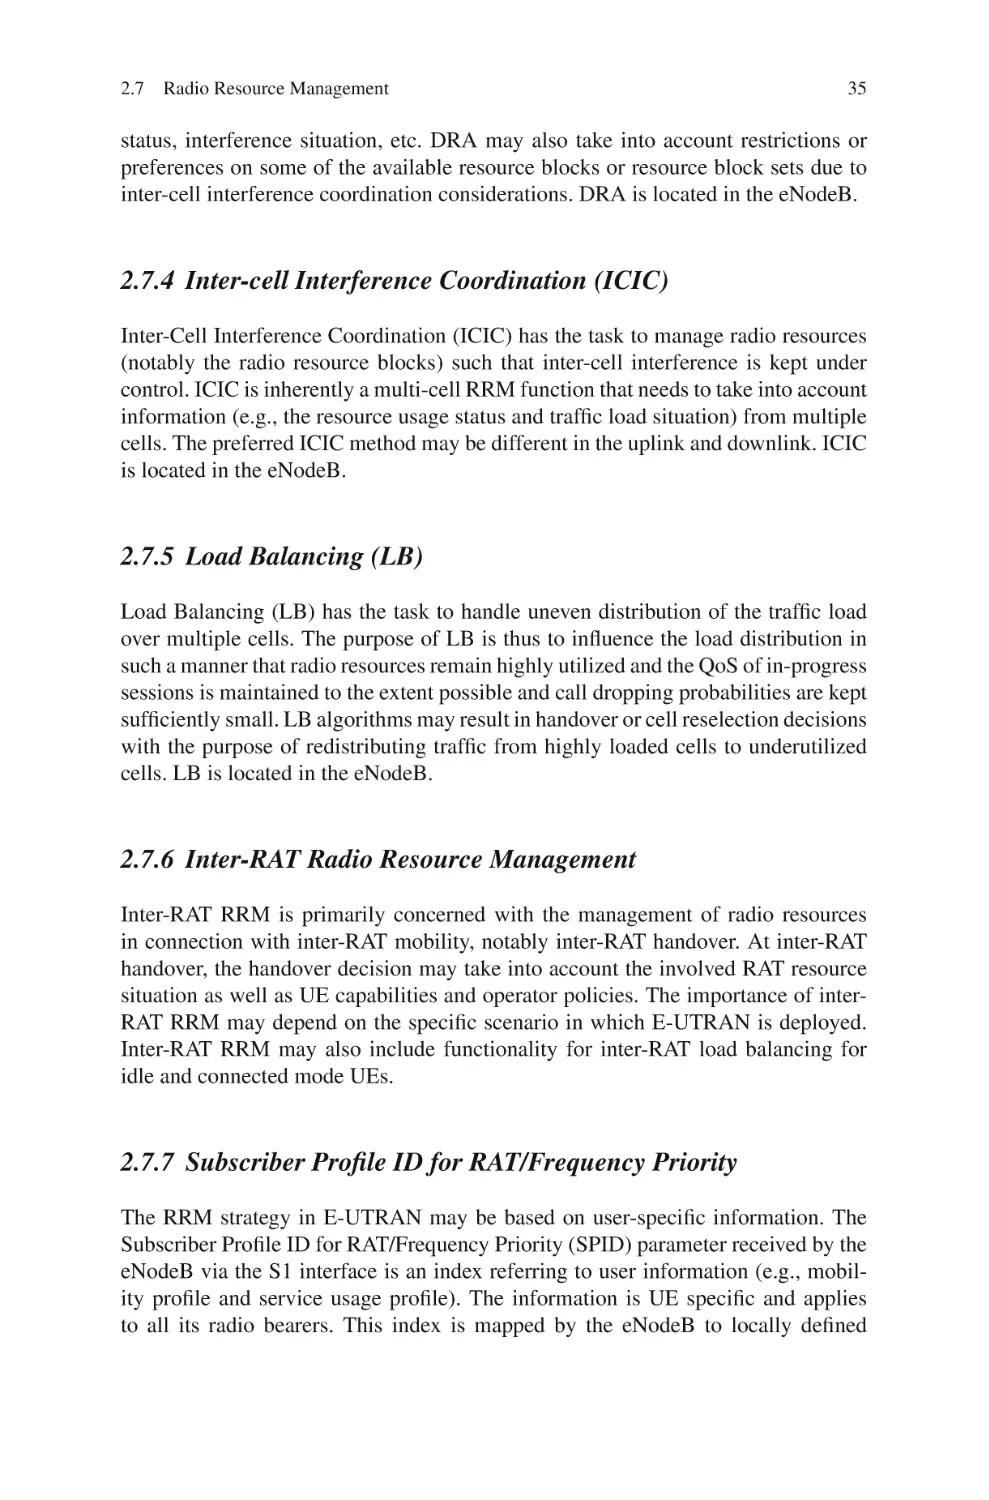 2.7.4  Inter-cell Interference Coordination (ICIC)
2.7.5  Load Balancing (LB)
2.7.6  Inter-RAT Radio Resource Management
2.7.7  Subscriber Profile ID for RAT/Frequency Priority